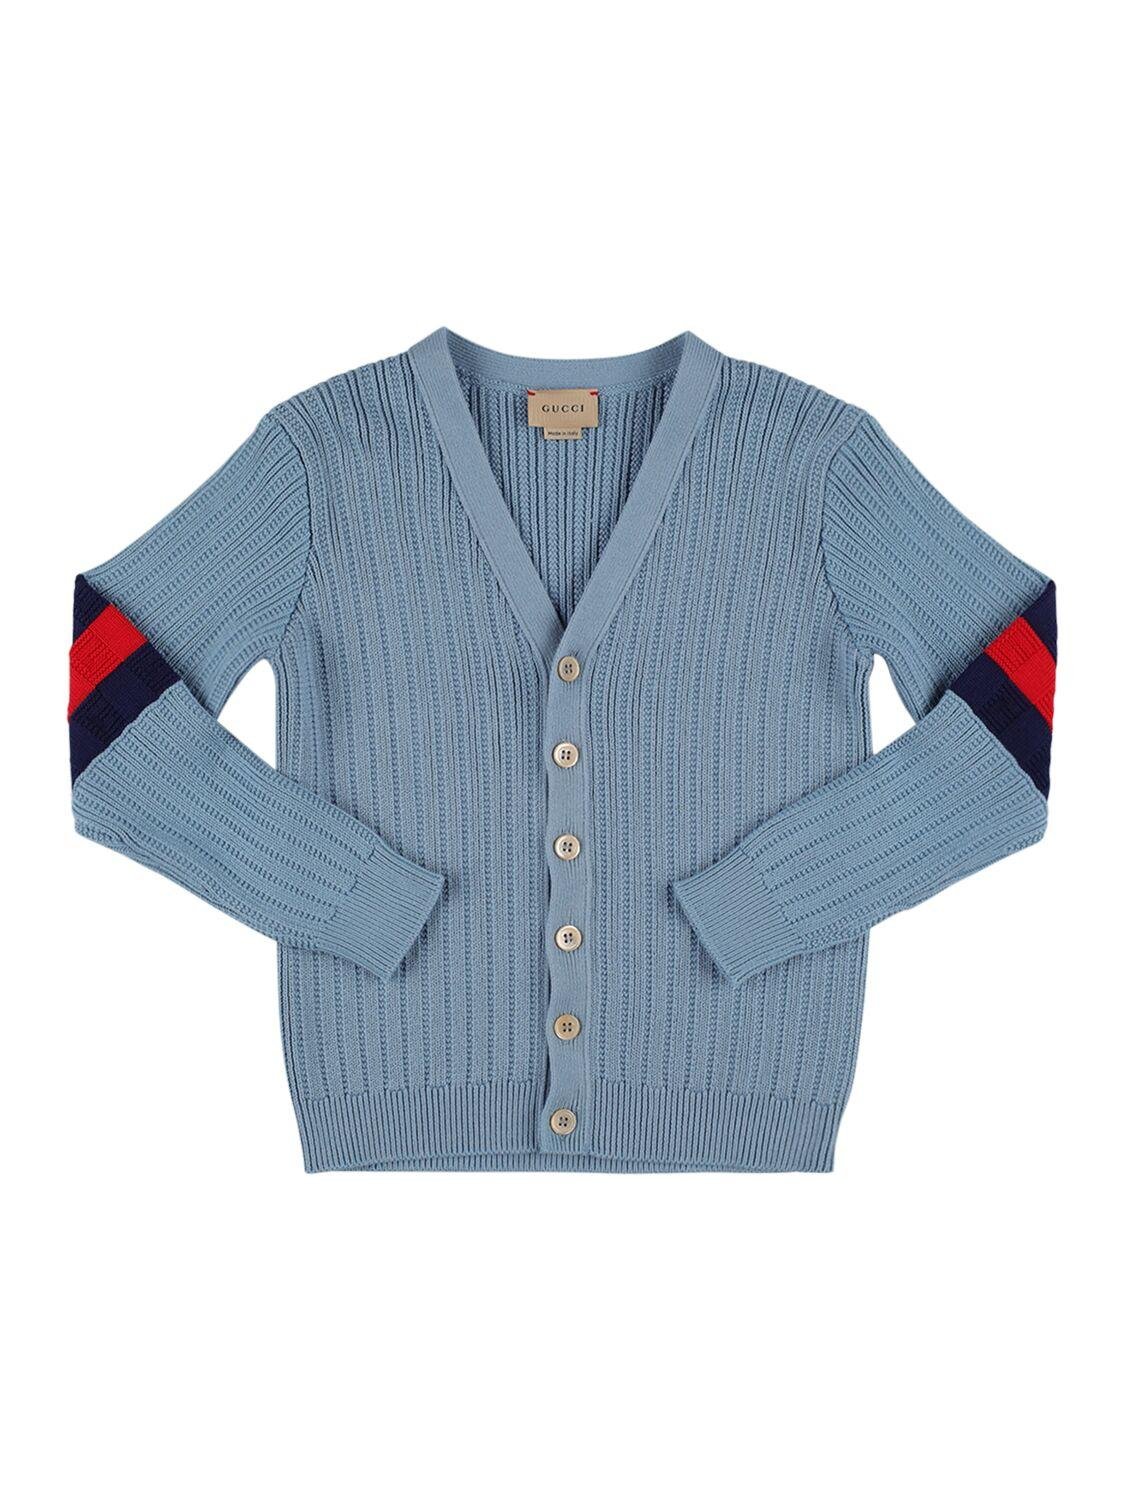 Cotton Cardigan by GUCCI